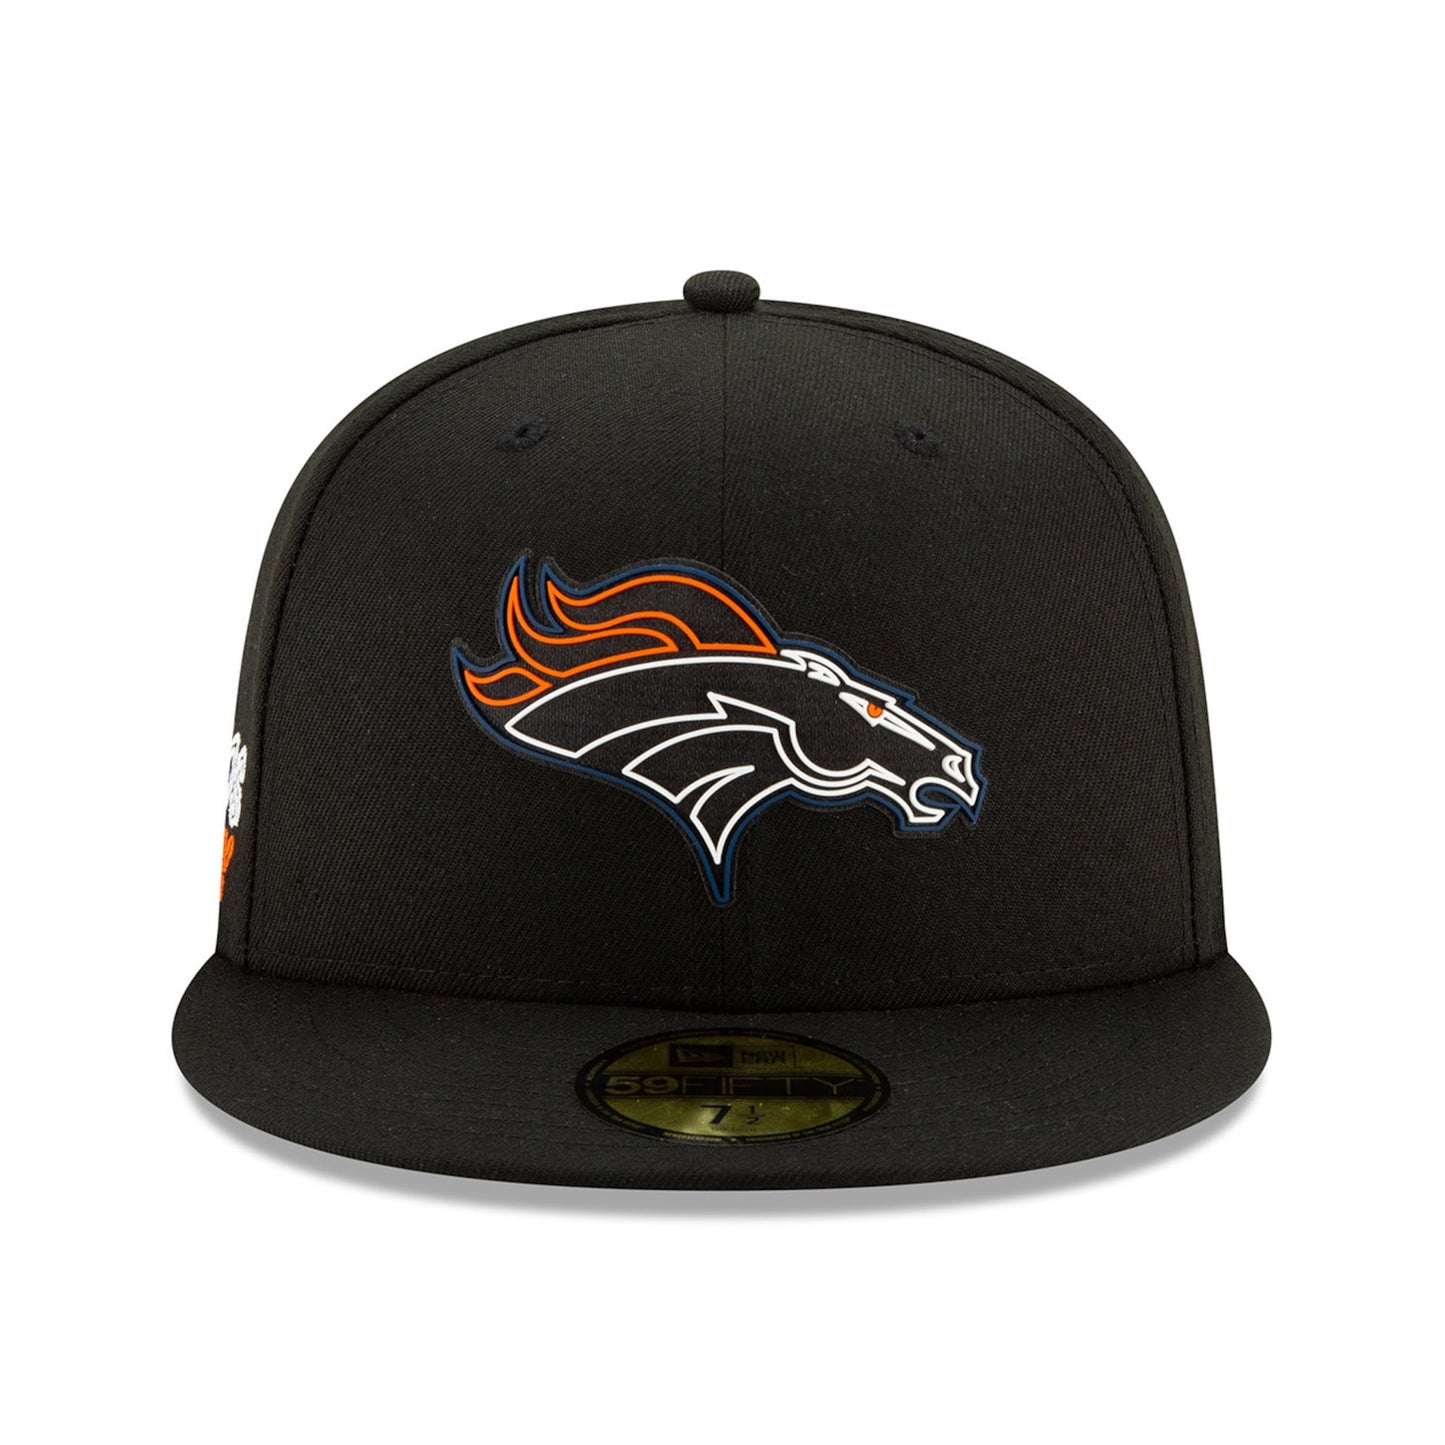 DENVER BRONCOS 2020 DRAFT DAY 59FIFTY FITTED